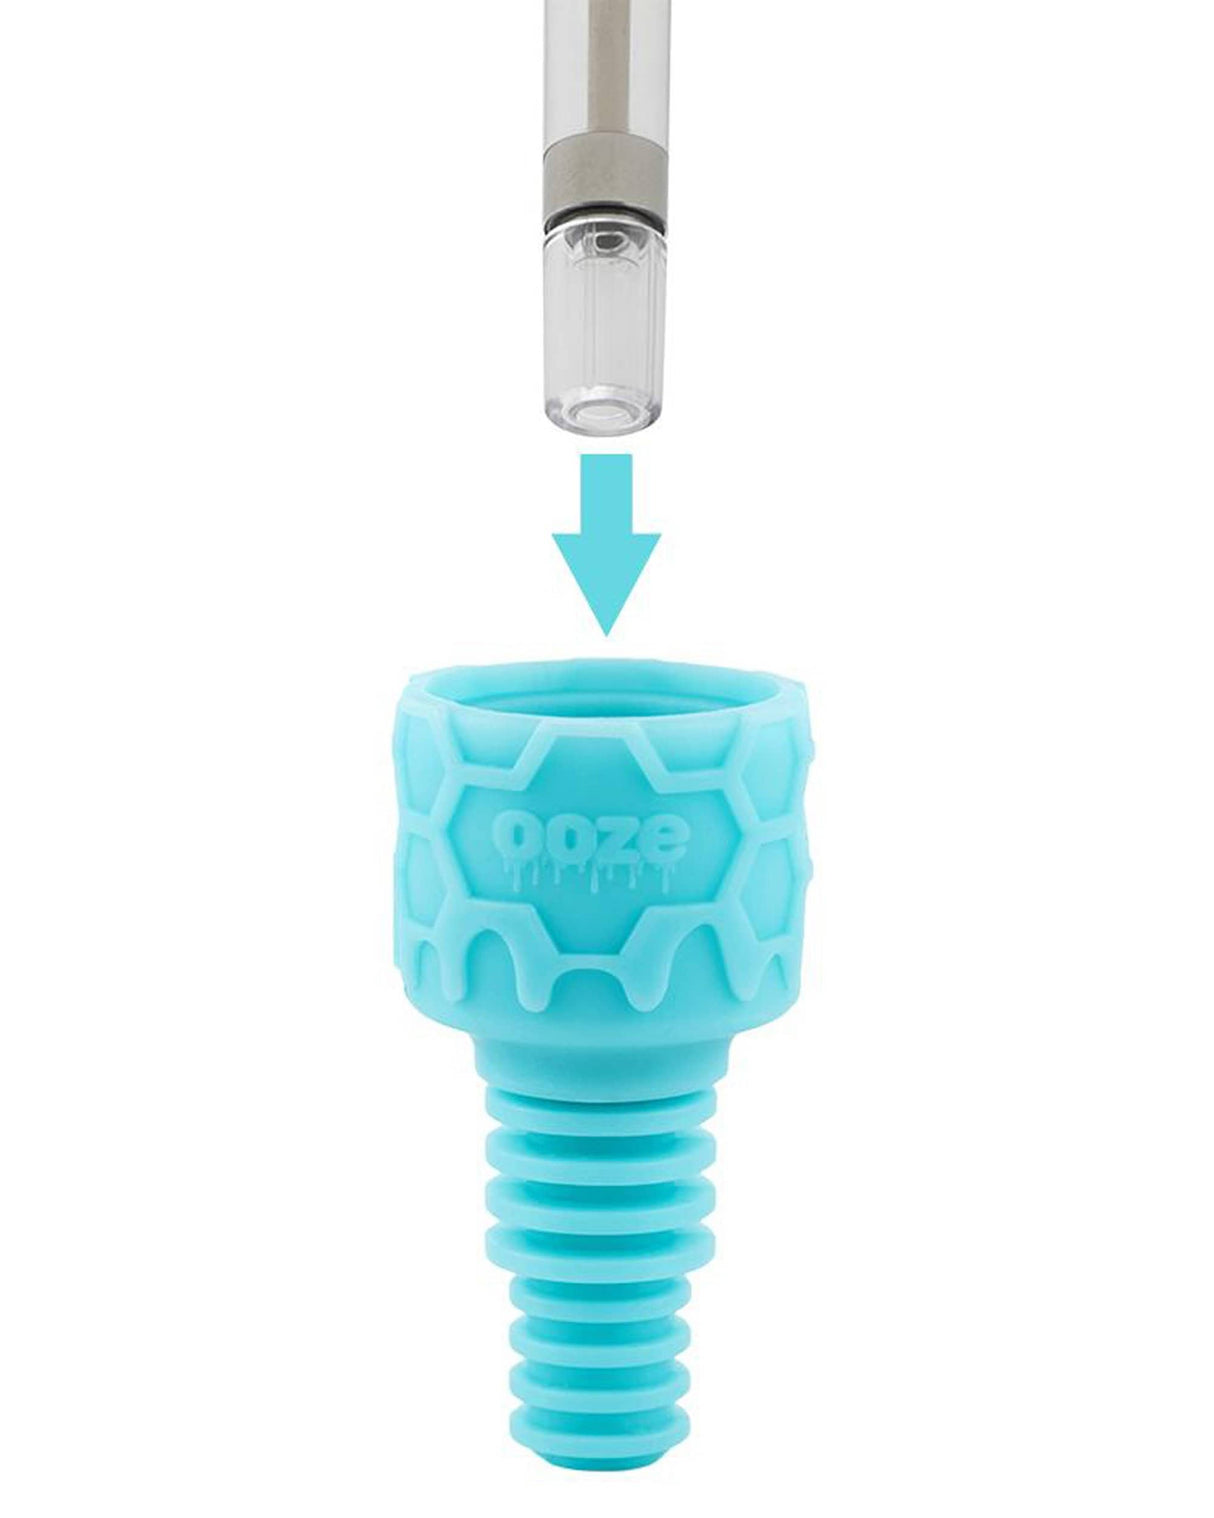 Ooze Echo Silicone Bong Bowl in Teal, 14mm Joint, Front View with Glass Downstem